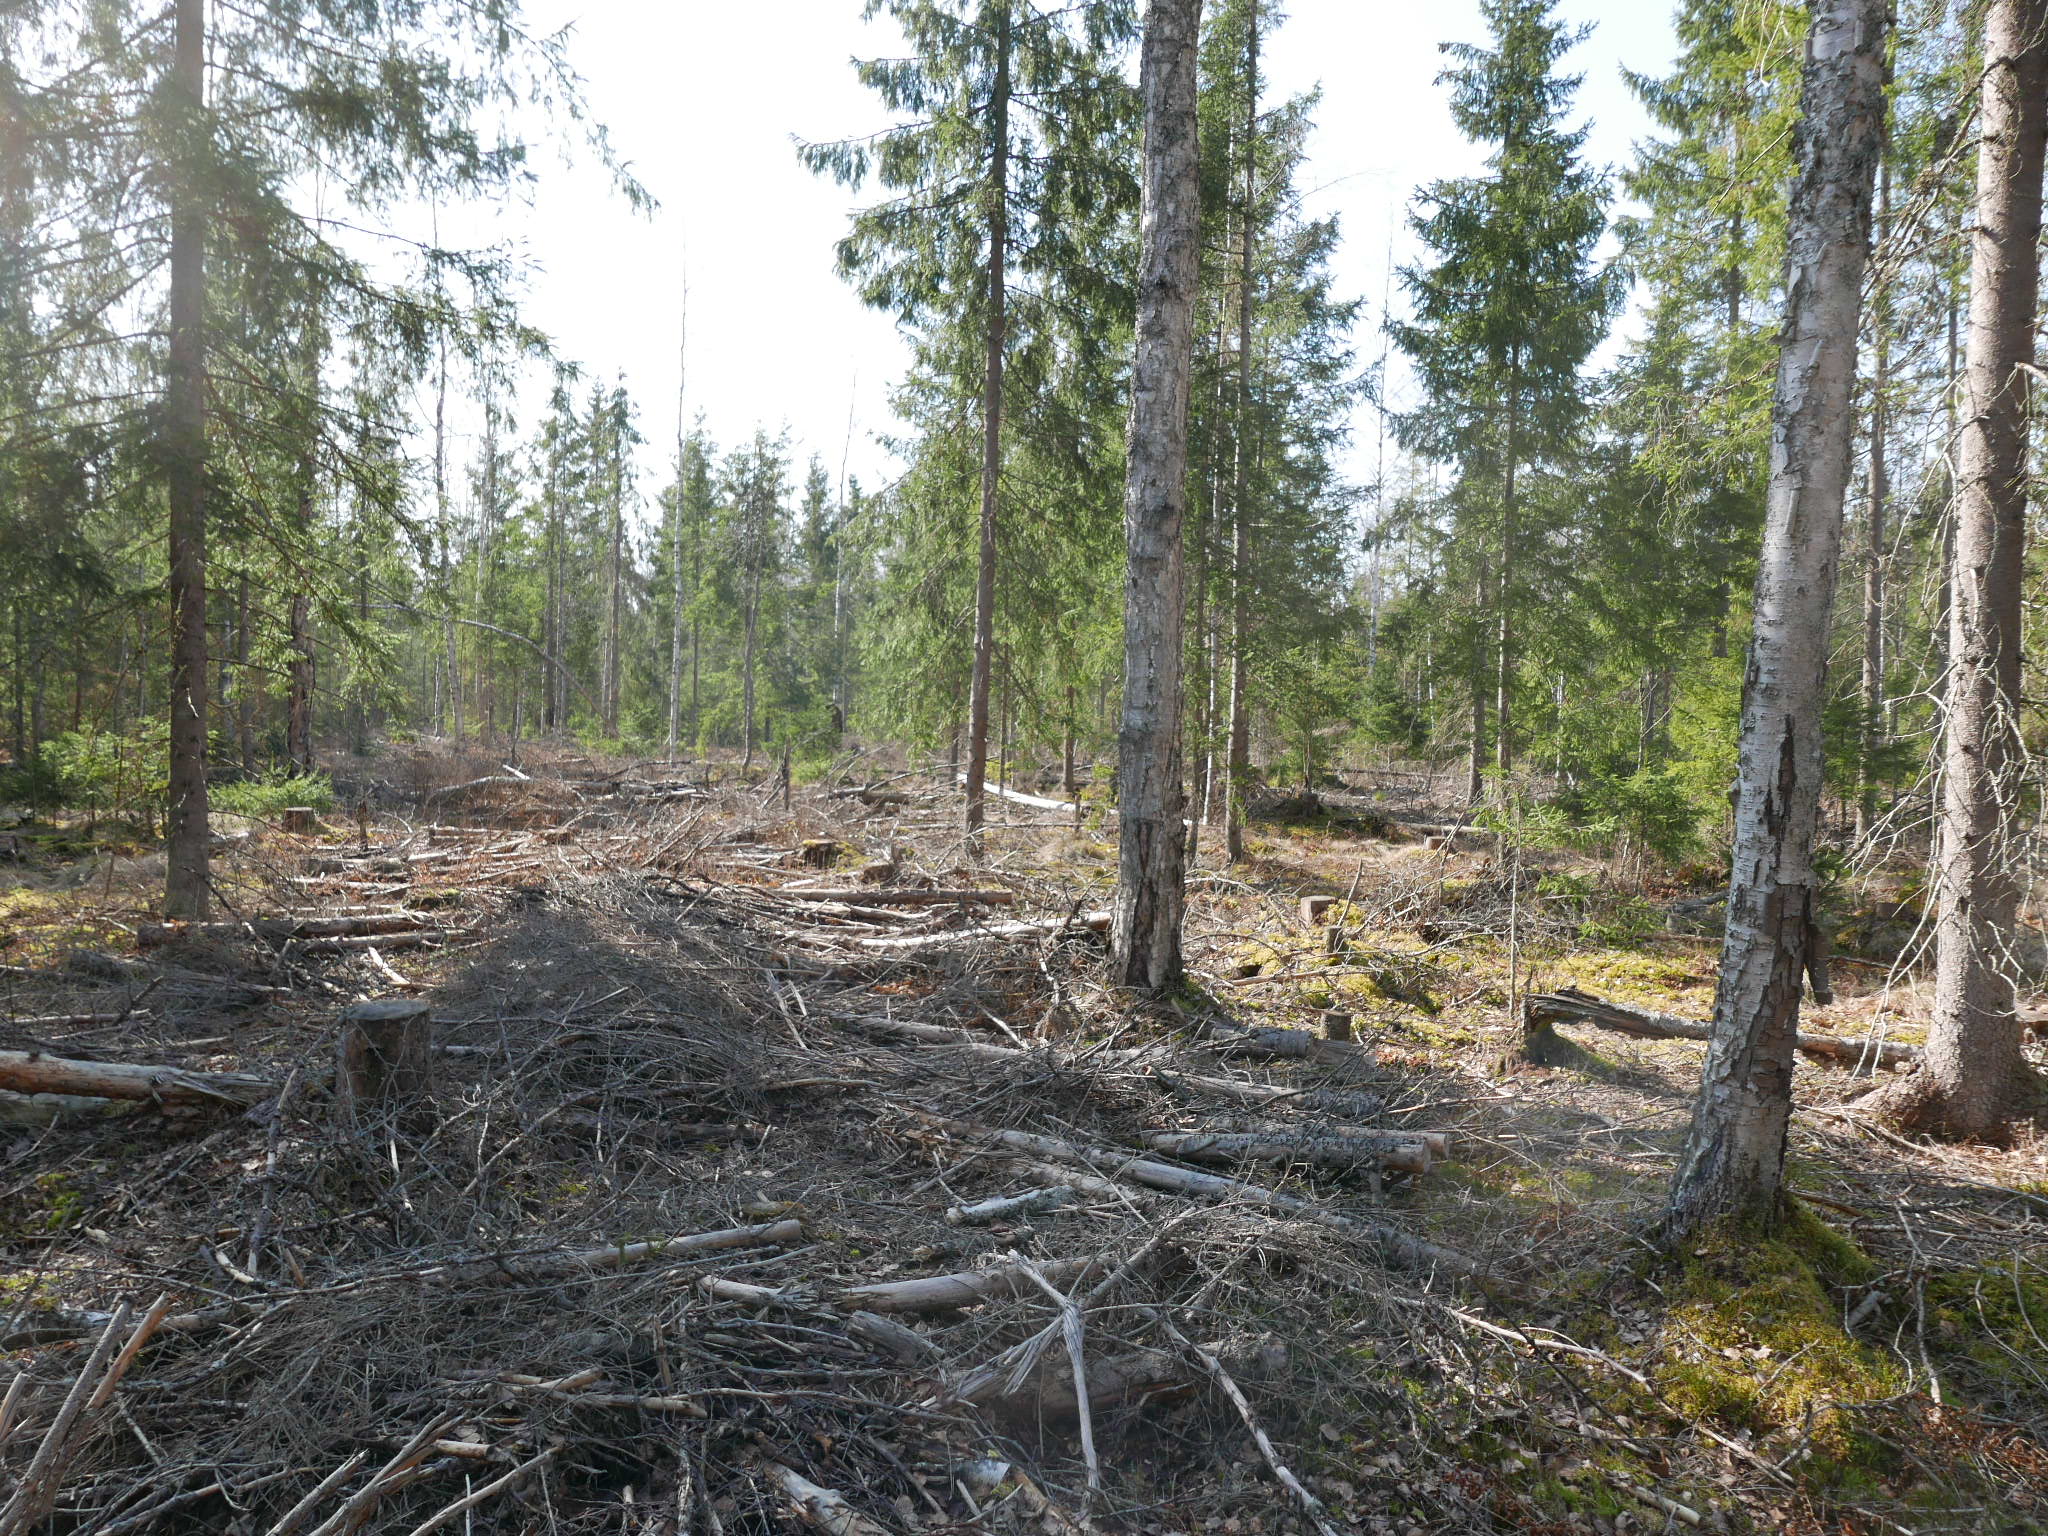 Partially harvested peatland forest in Southern Finland. Photo by Mika Korkiakoski.